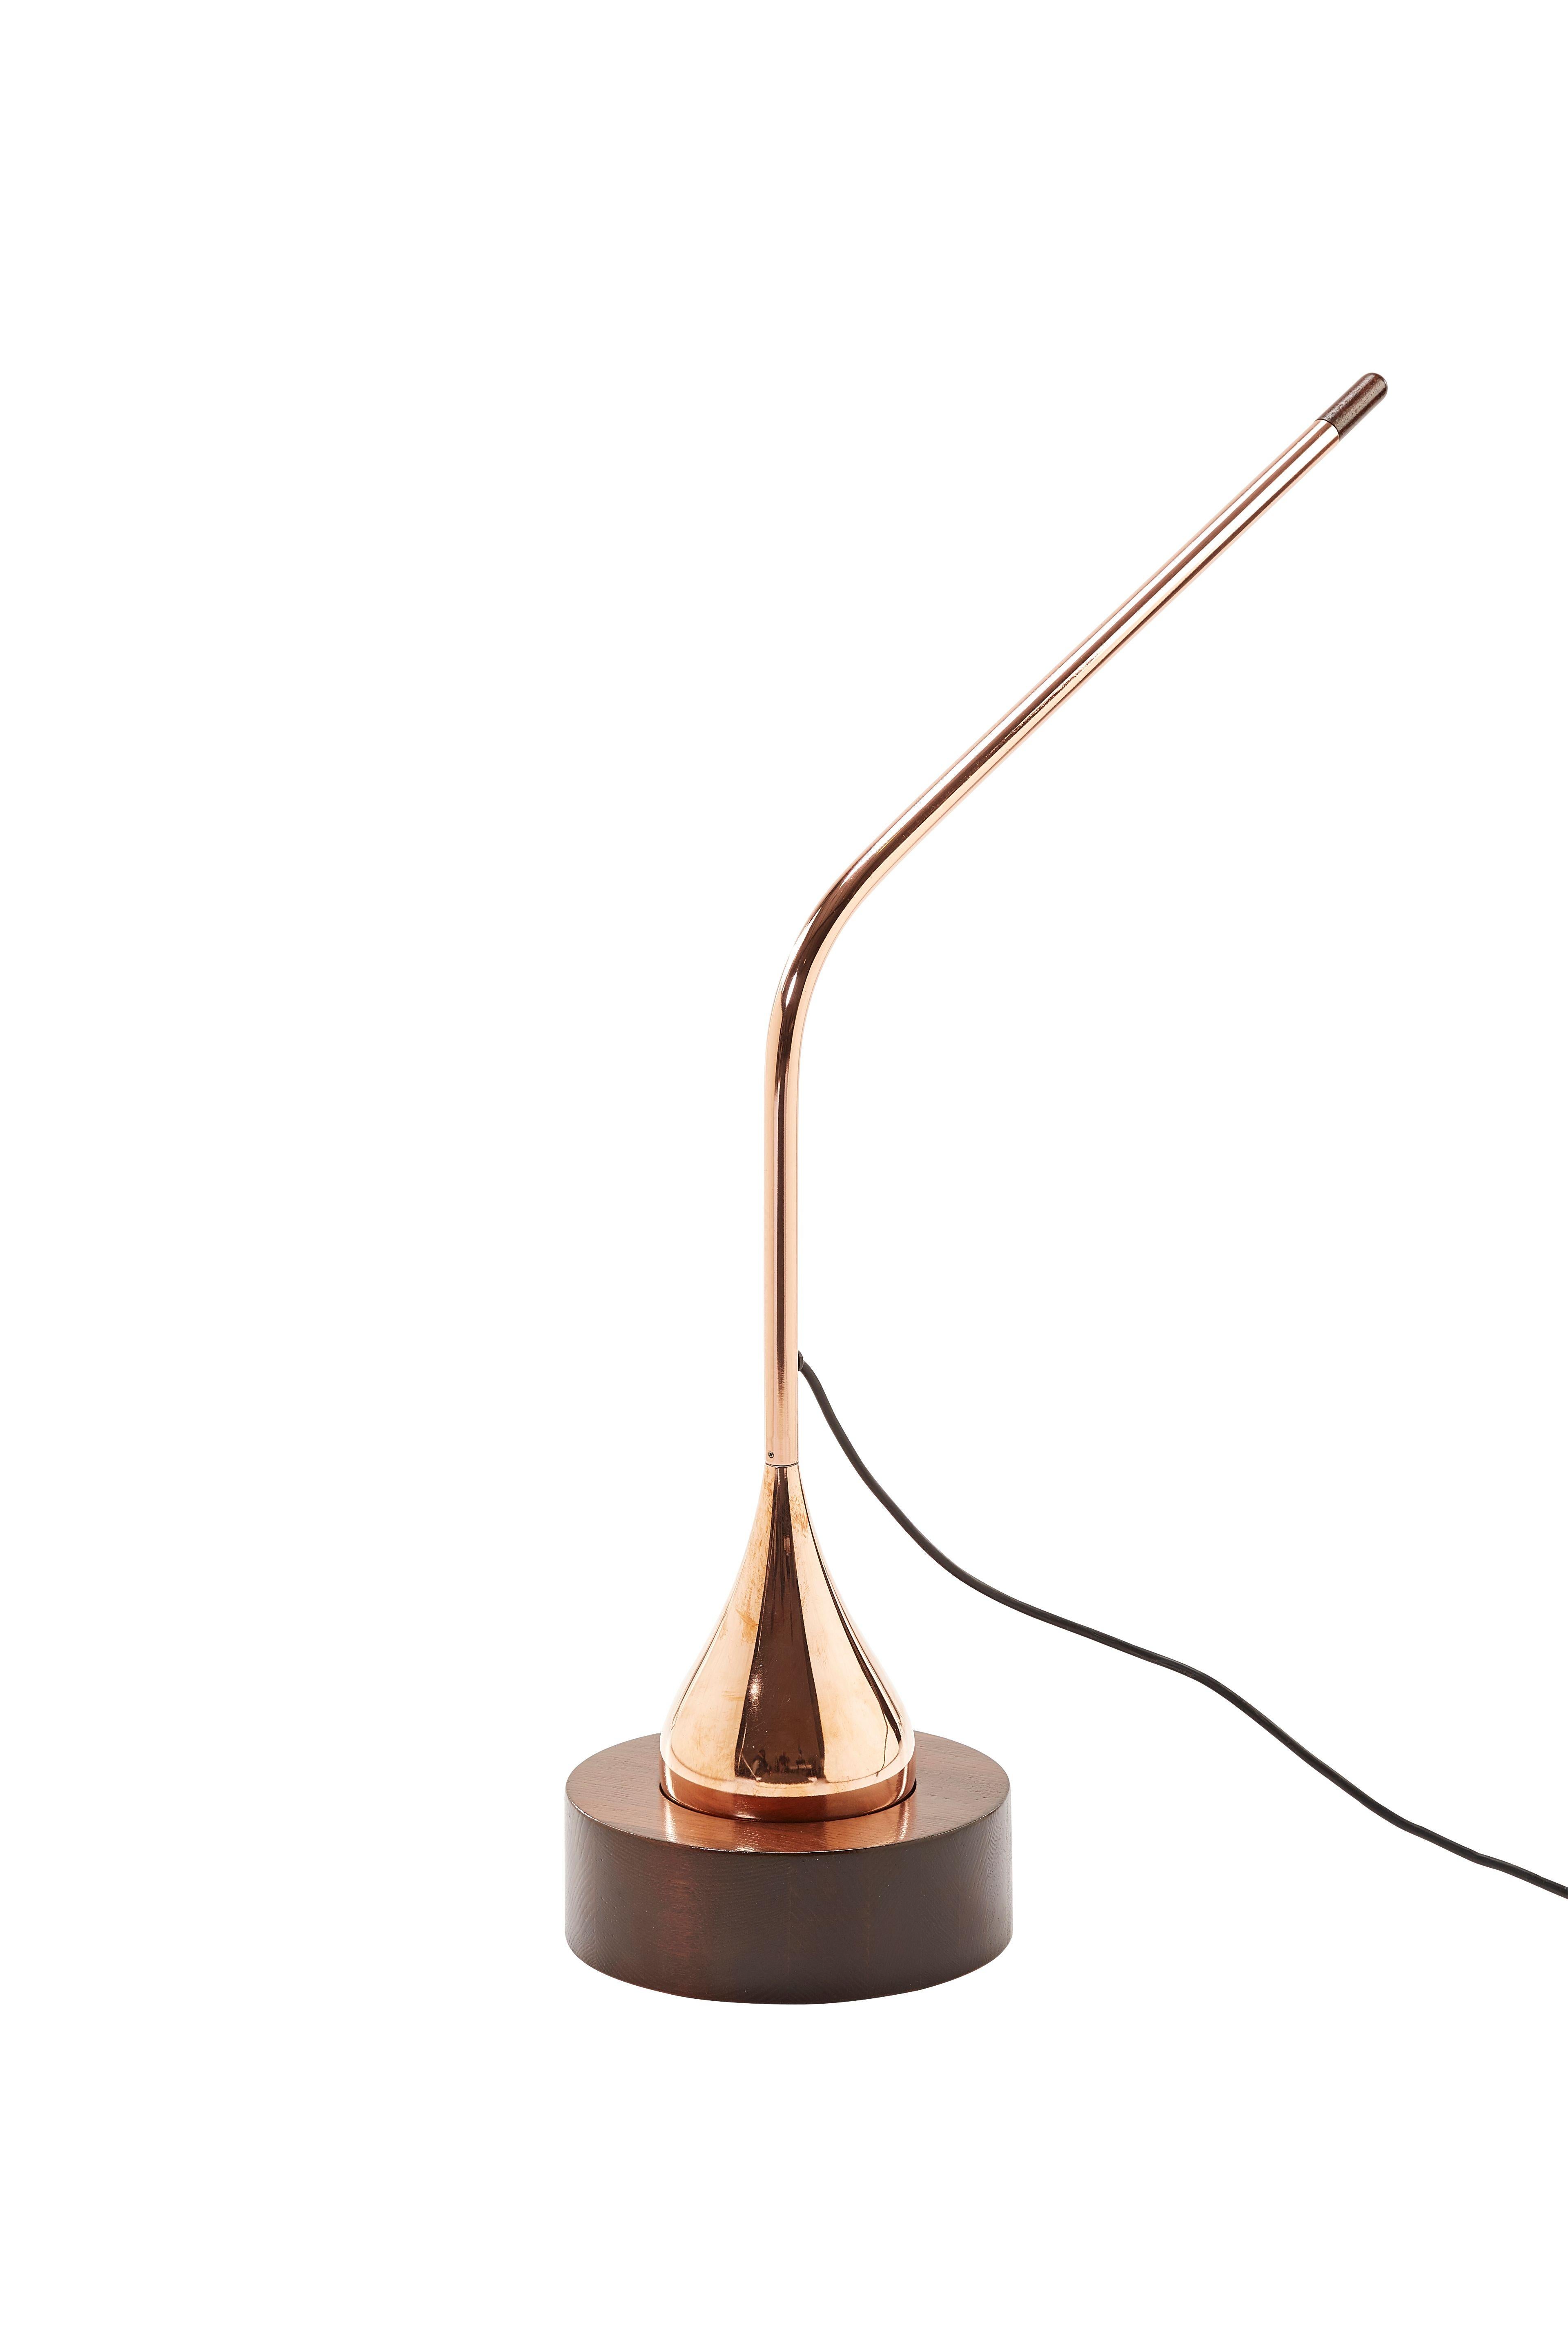 South African Mortar & Pestle Table Lamp by Egg Designs